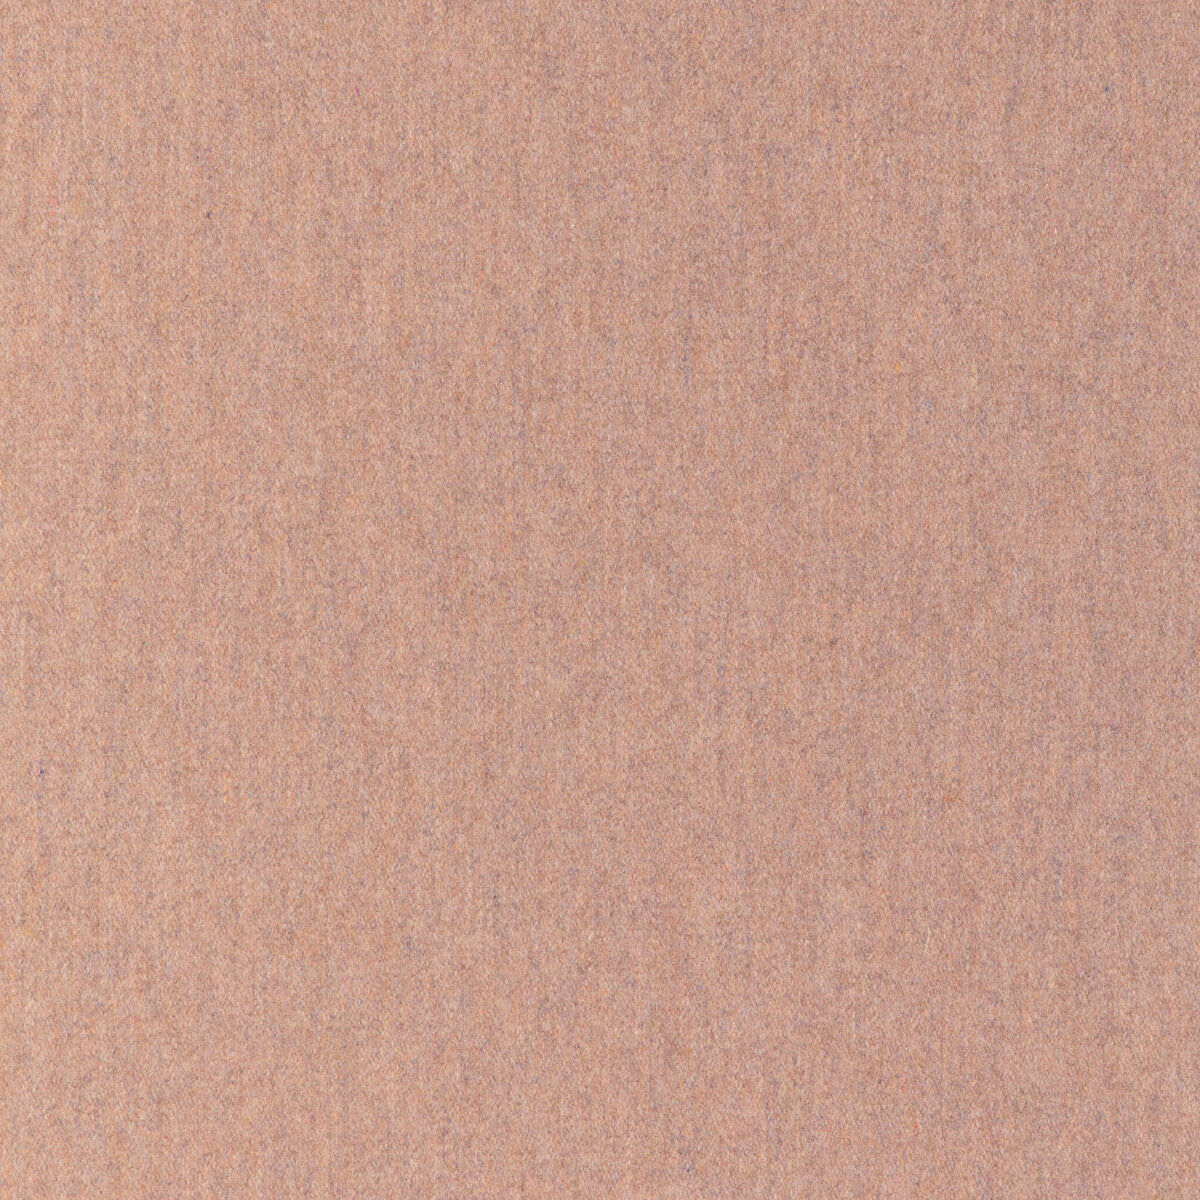 Jefferson Wool fabric in rosewood color - pattern 34397.711.0 - by Kravet Contract